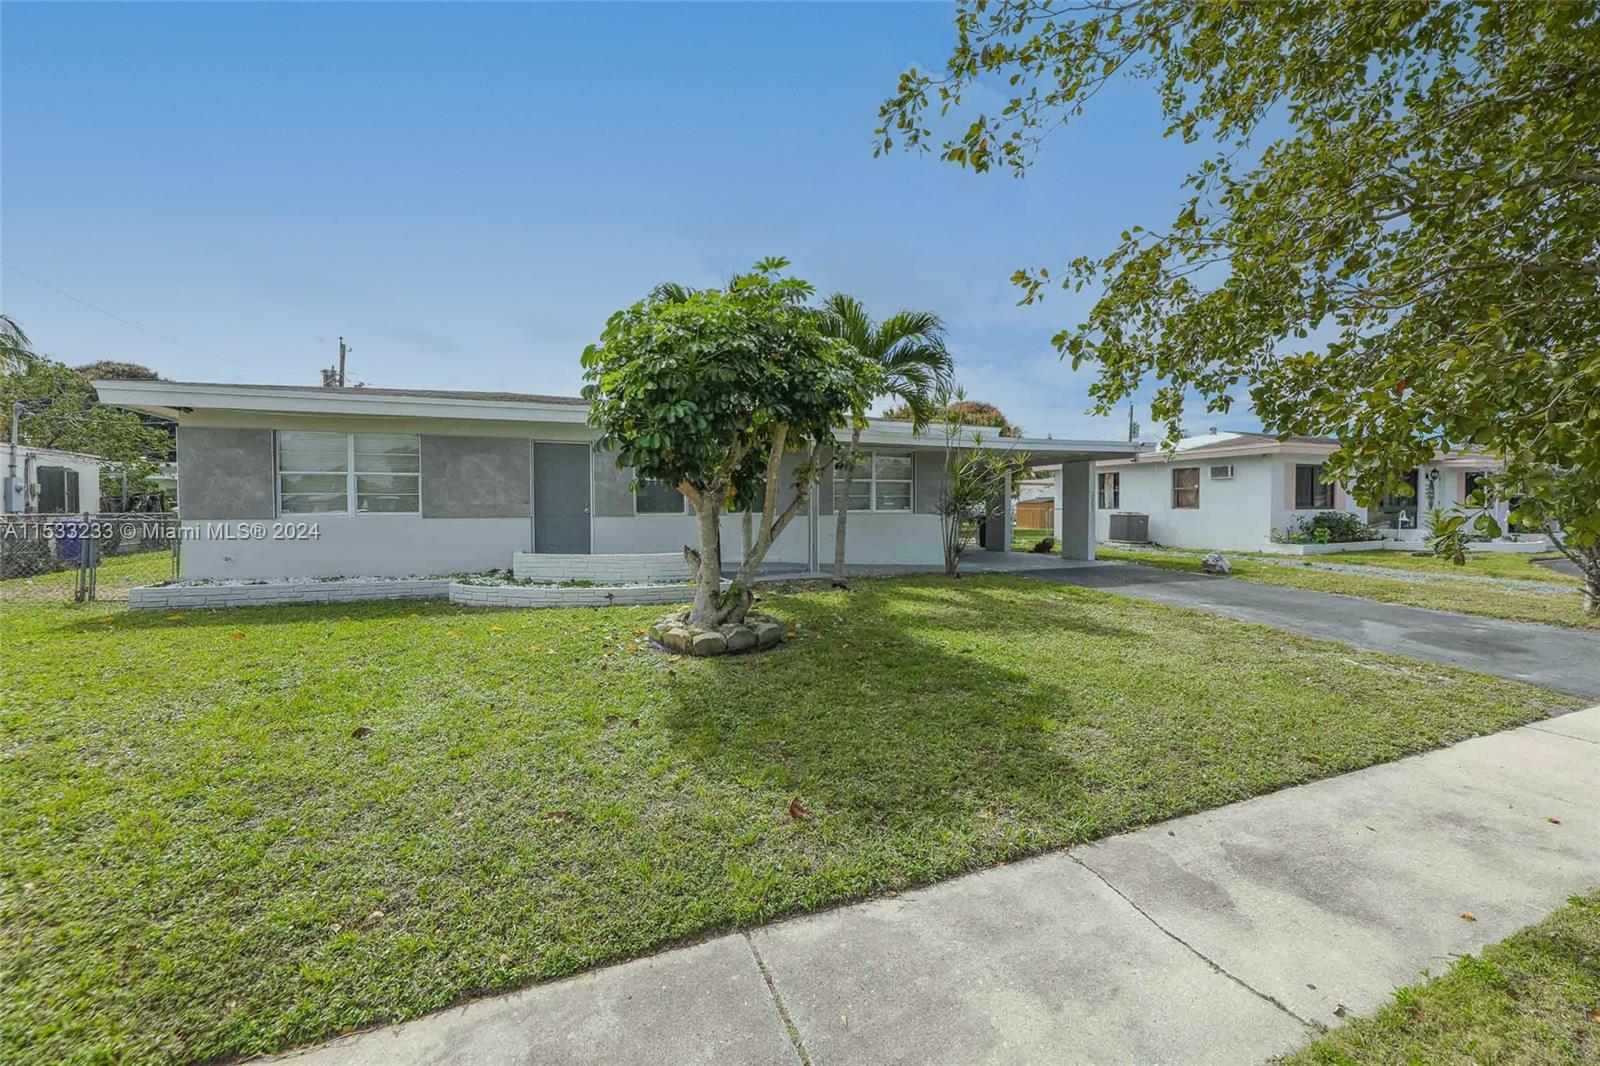 Fully renovated 4-bed 2-bath home with a car port and driveway. Home features, a new quartz kitchen 